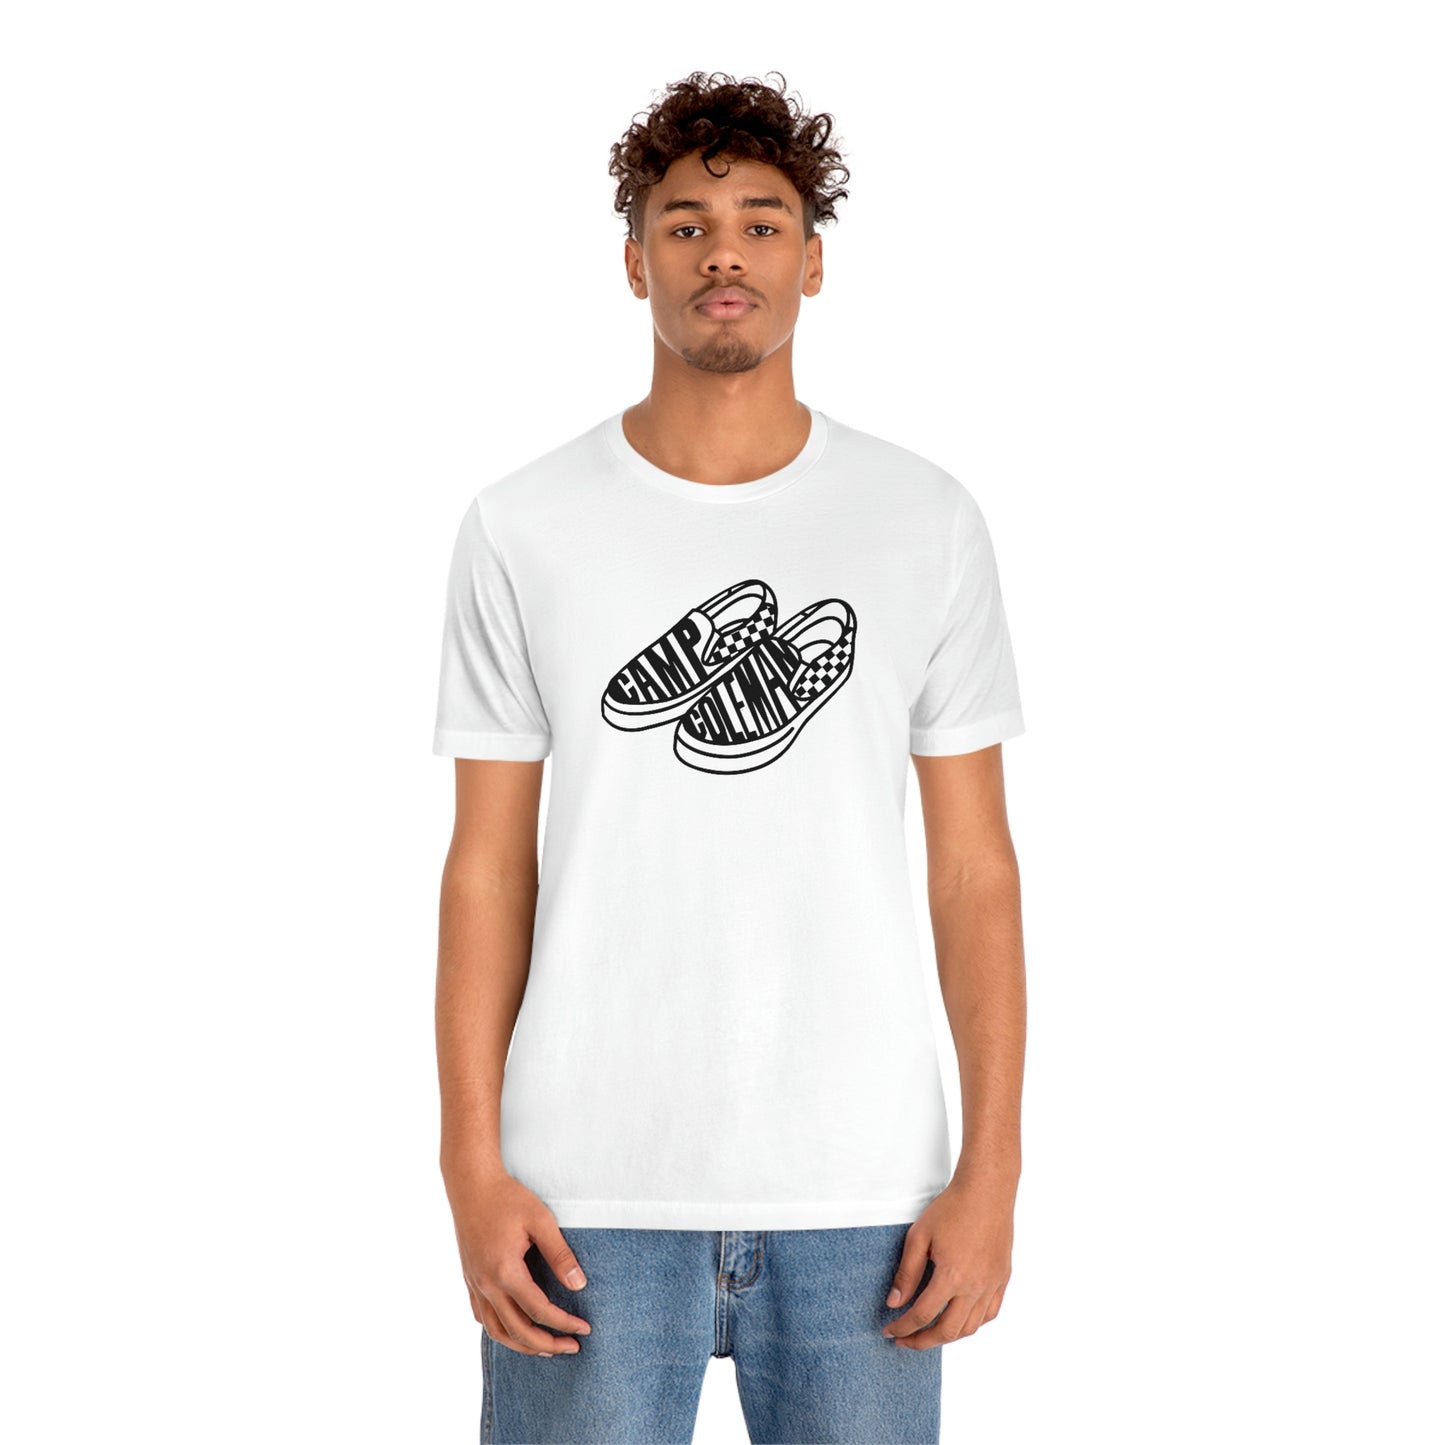 Coleman checkered skate shoes adult  Short Sleeve Tee (multiple colors)